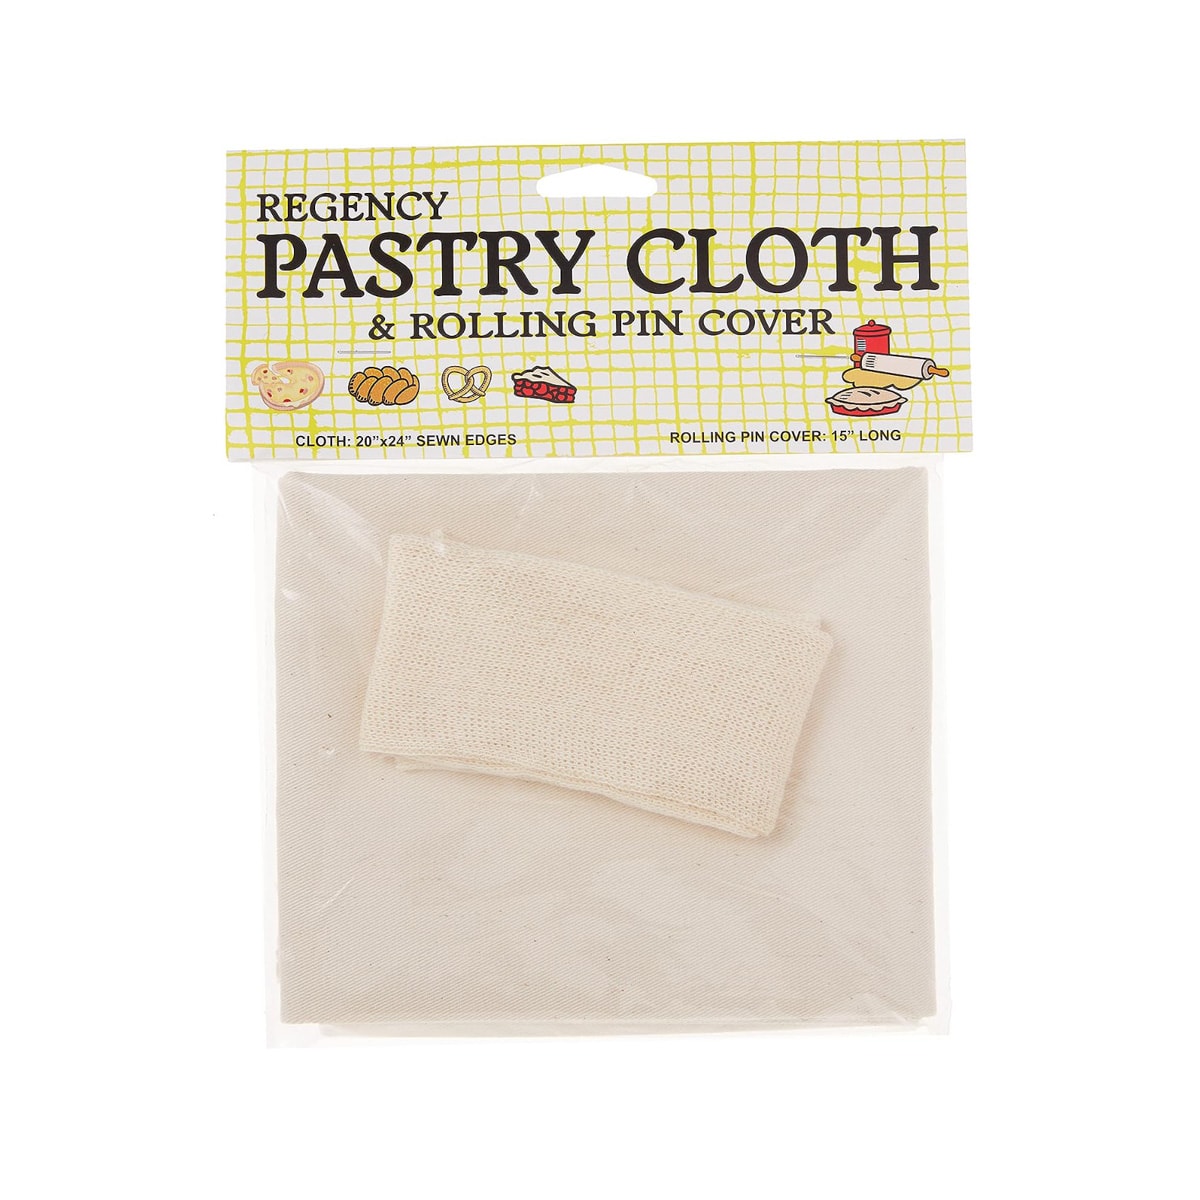 Pastry cloth.